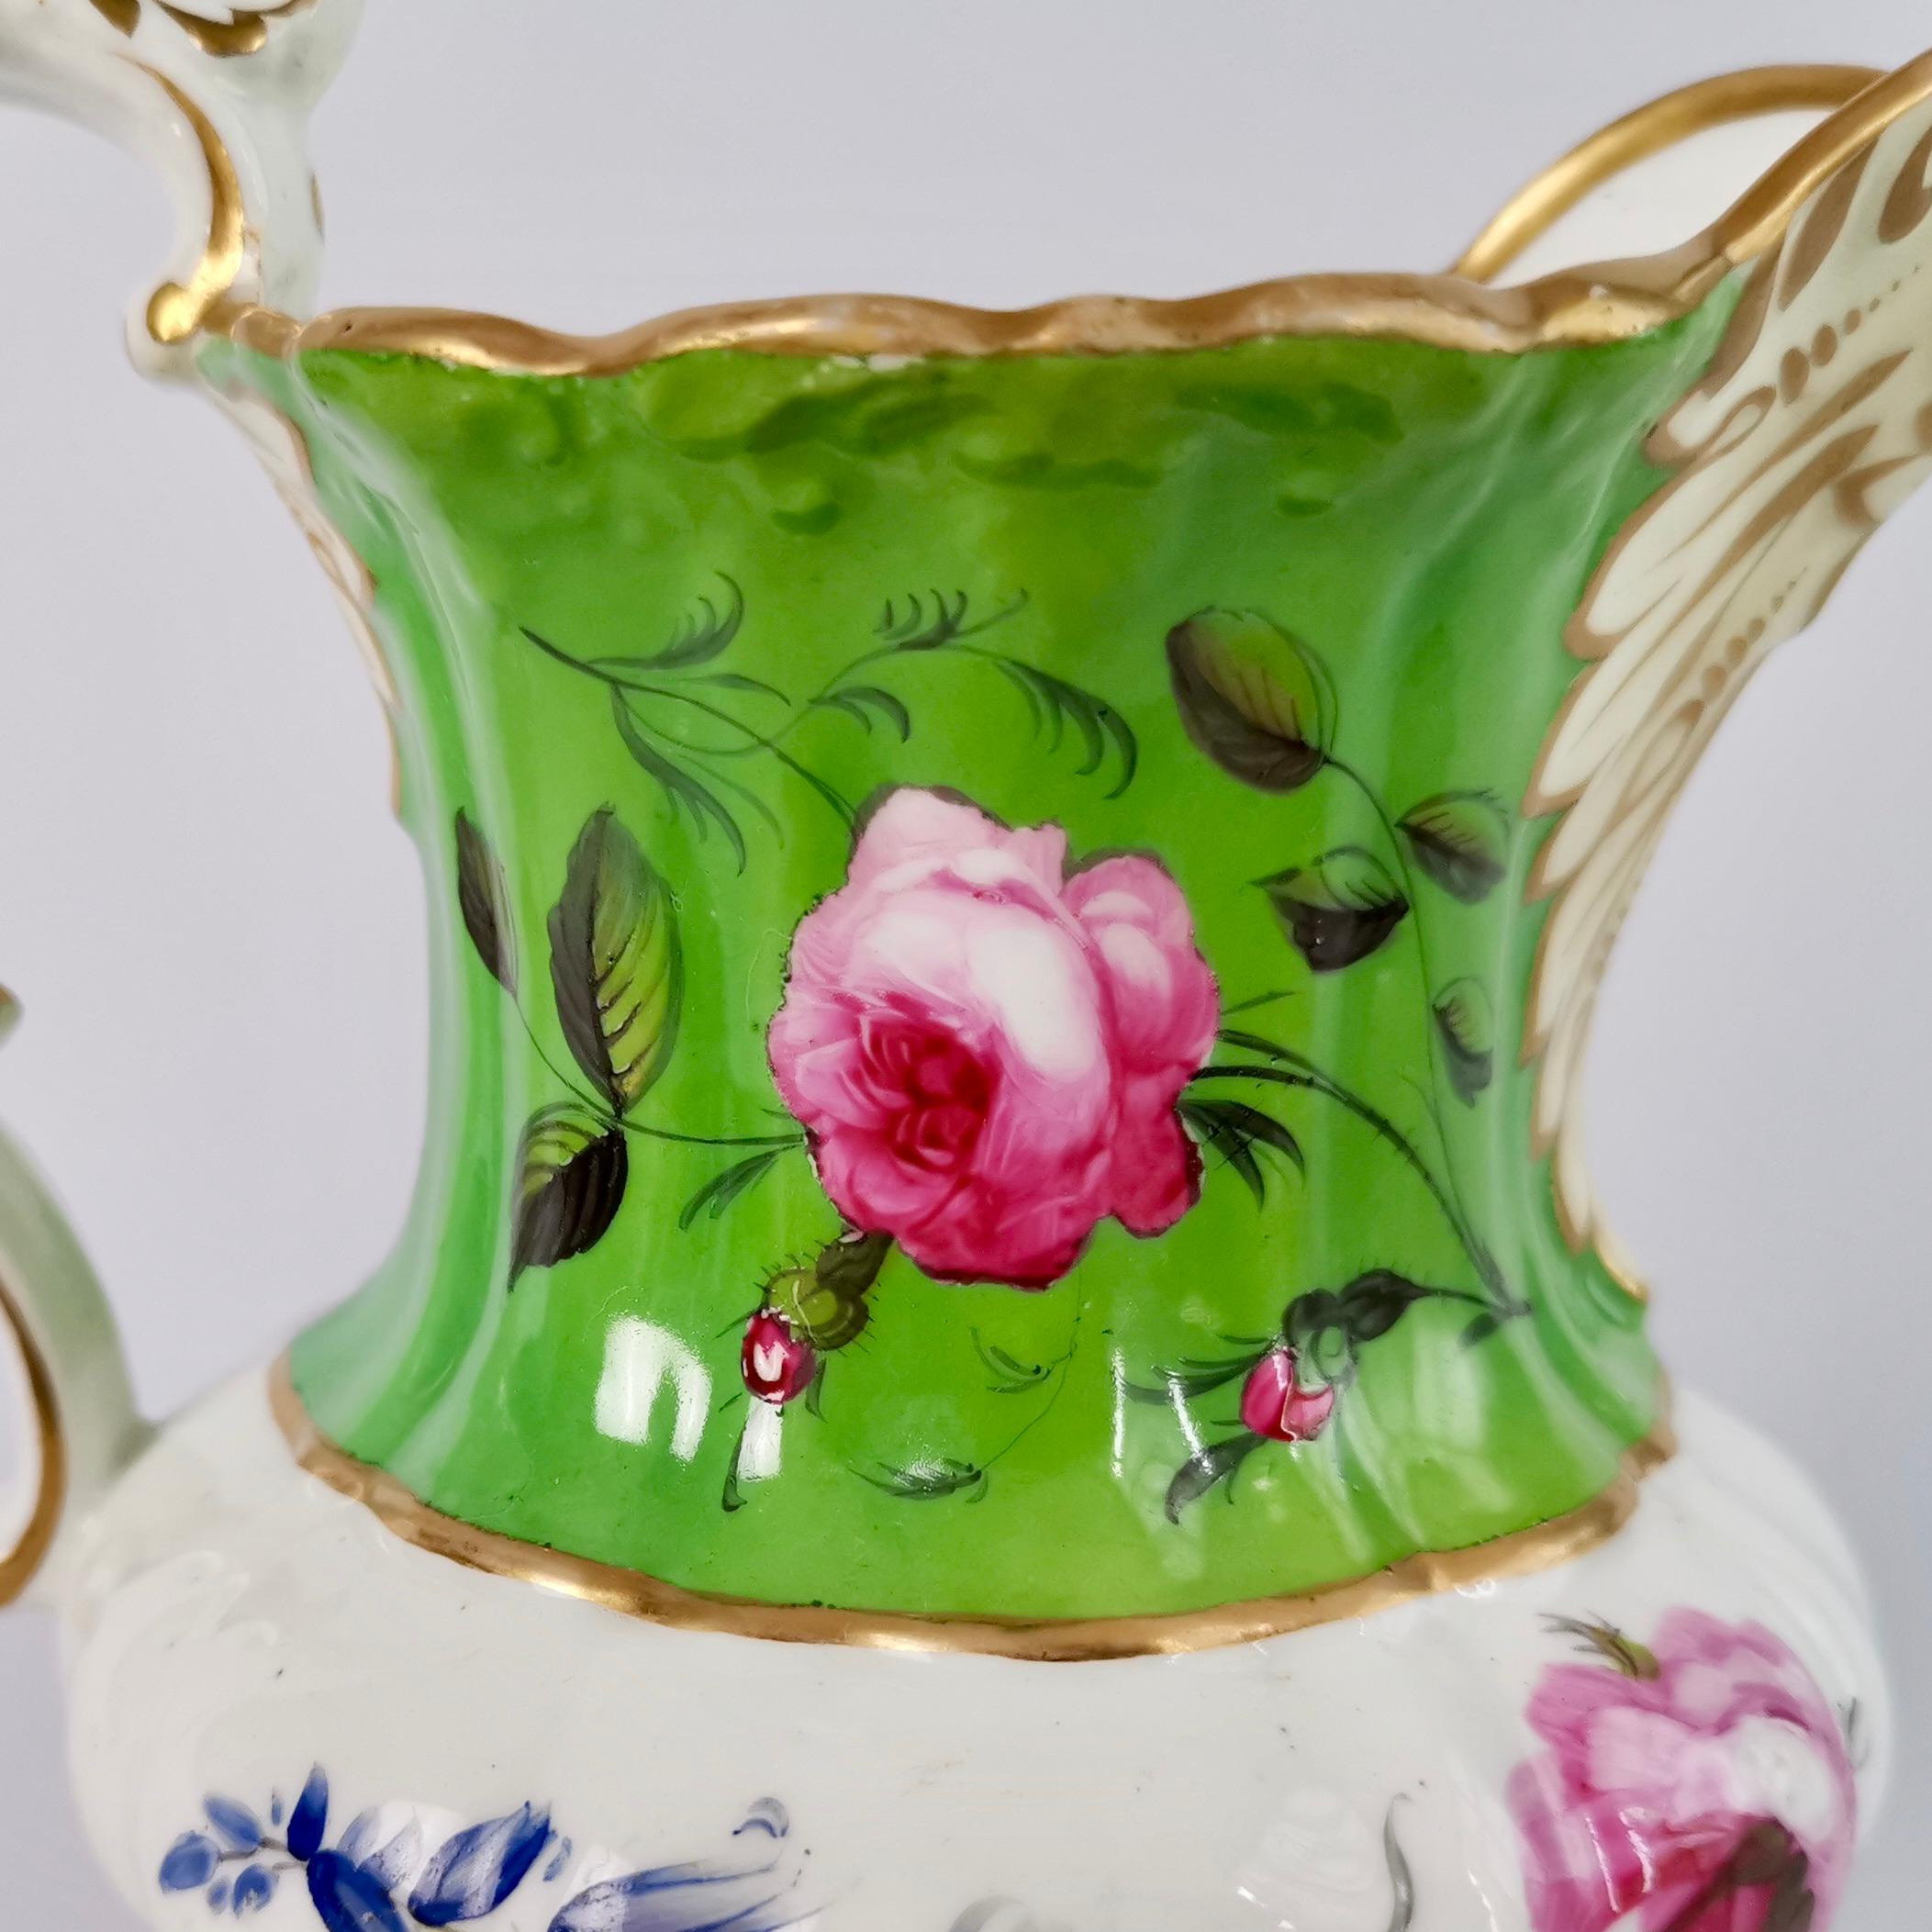 Hilditch Porcelain Pitcher, Apple Green with Hand Painted Flowers, circa 1830 3